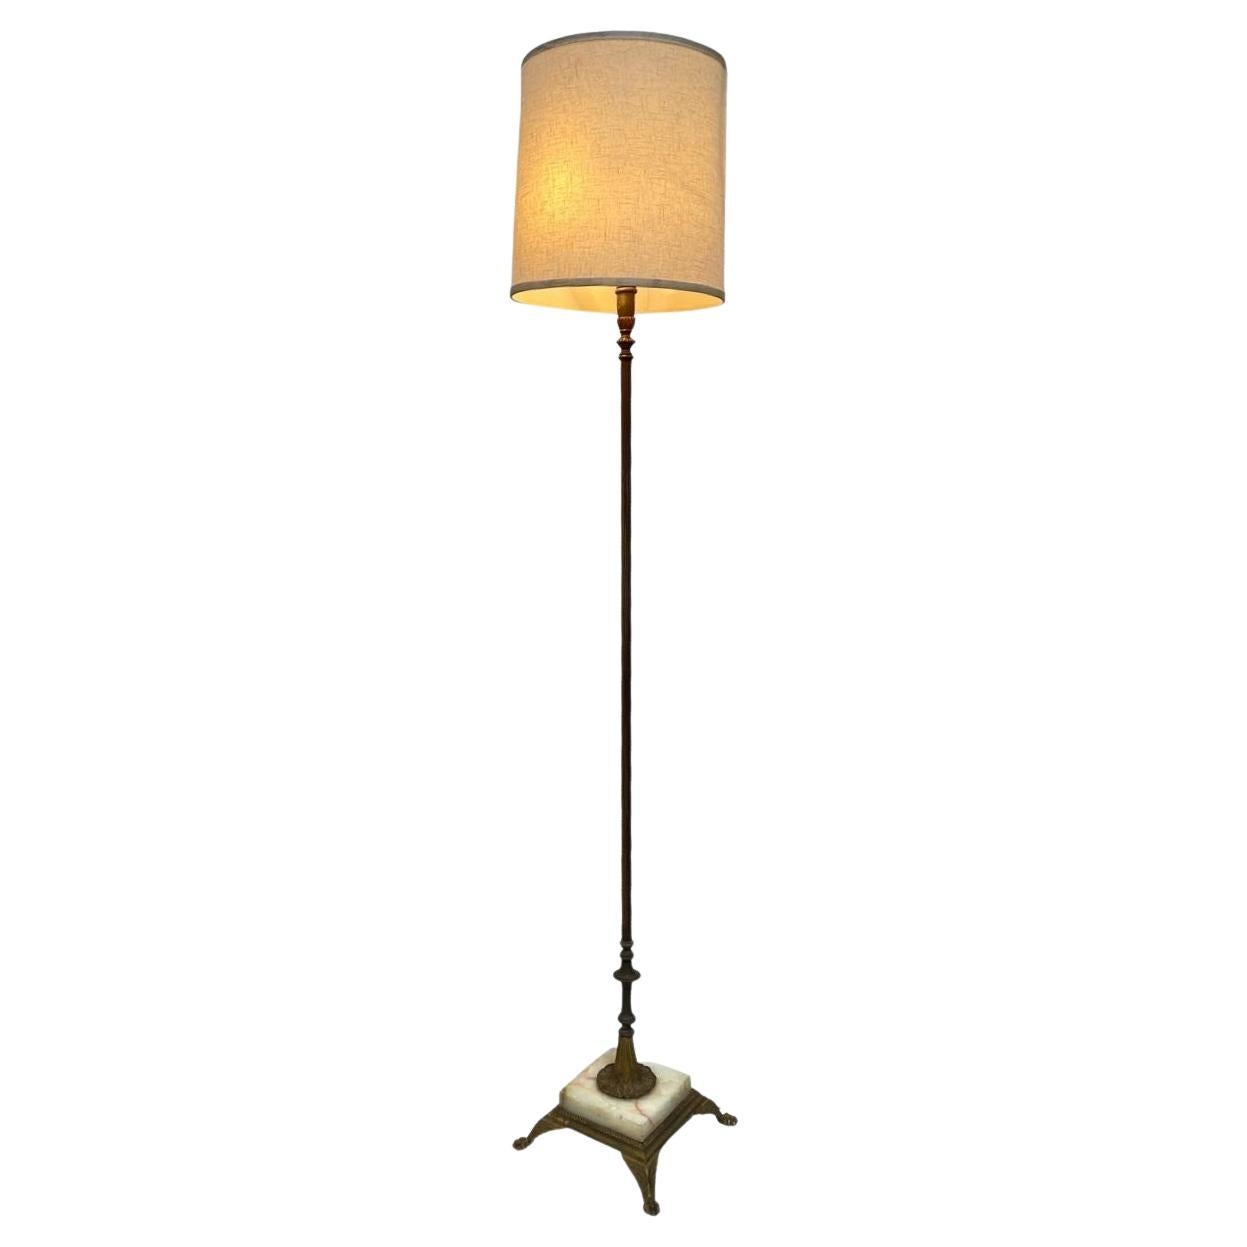 Brass and Marble Regency Floor Lamp with Shade , Circa 1930